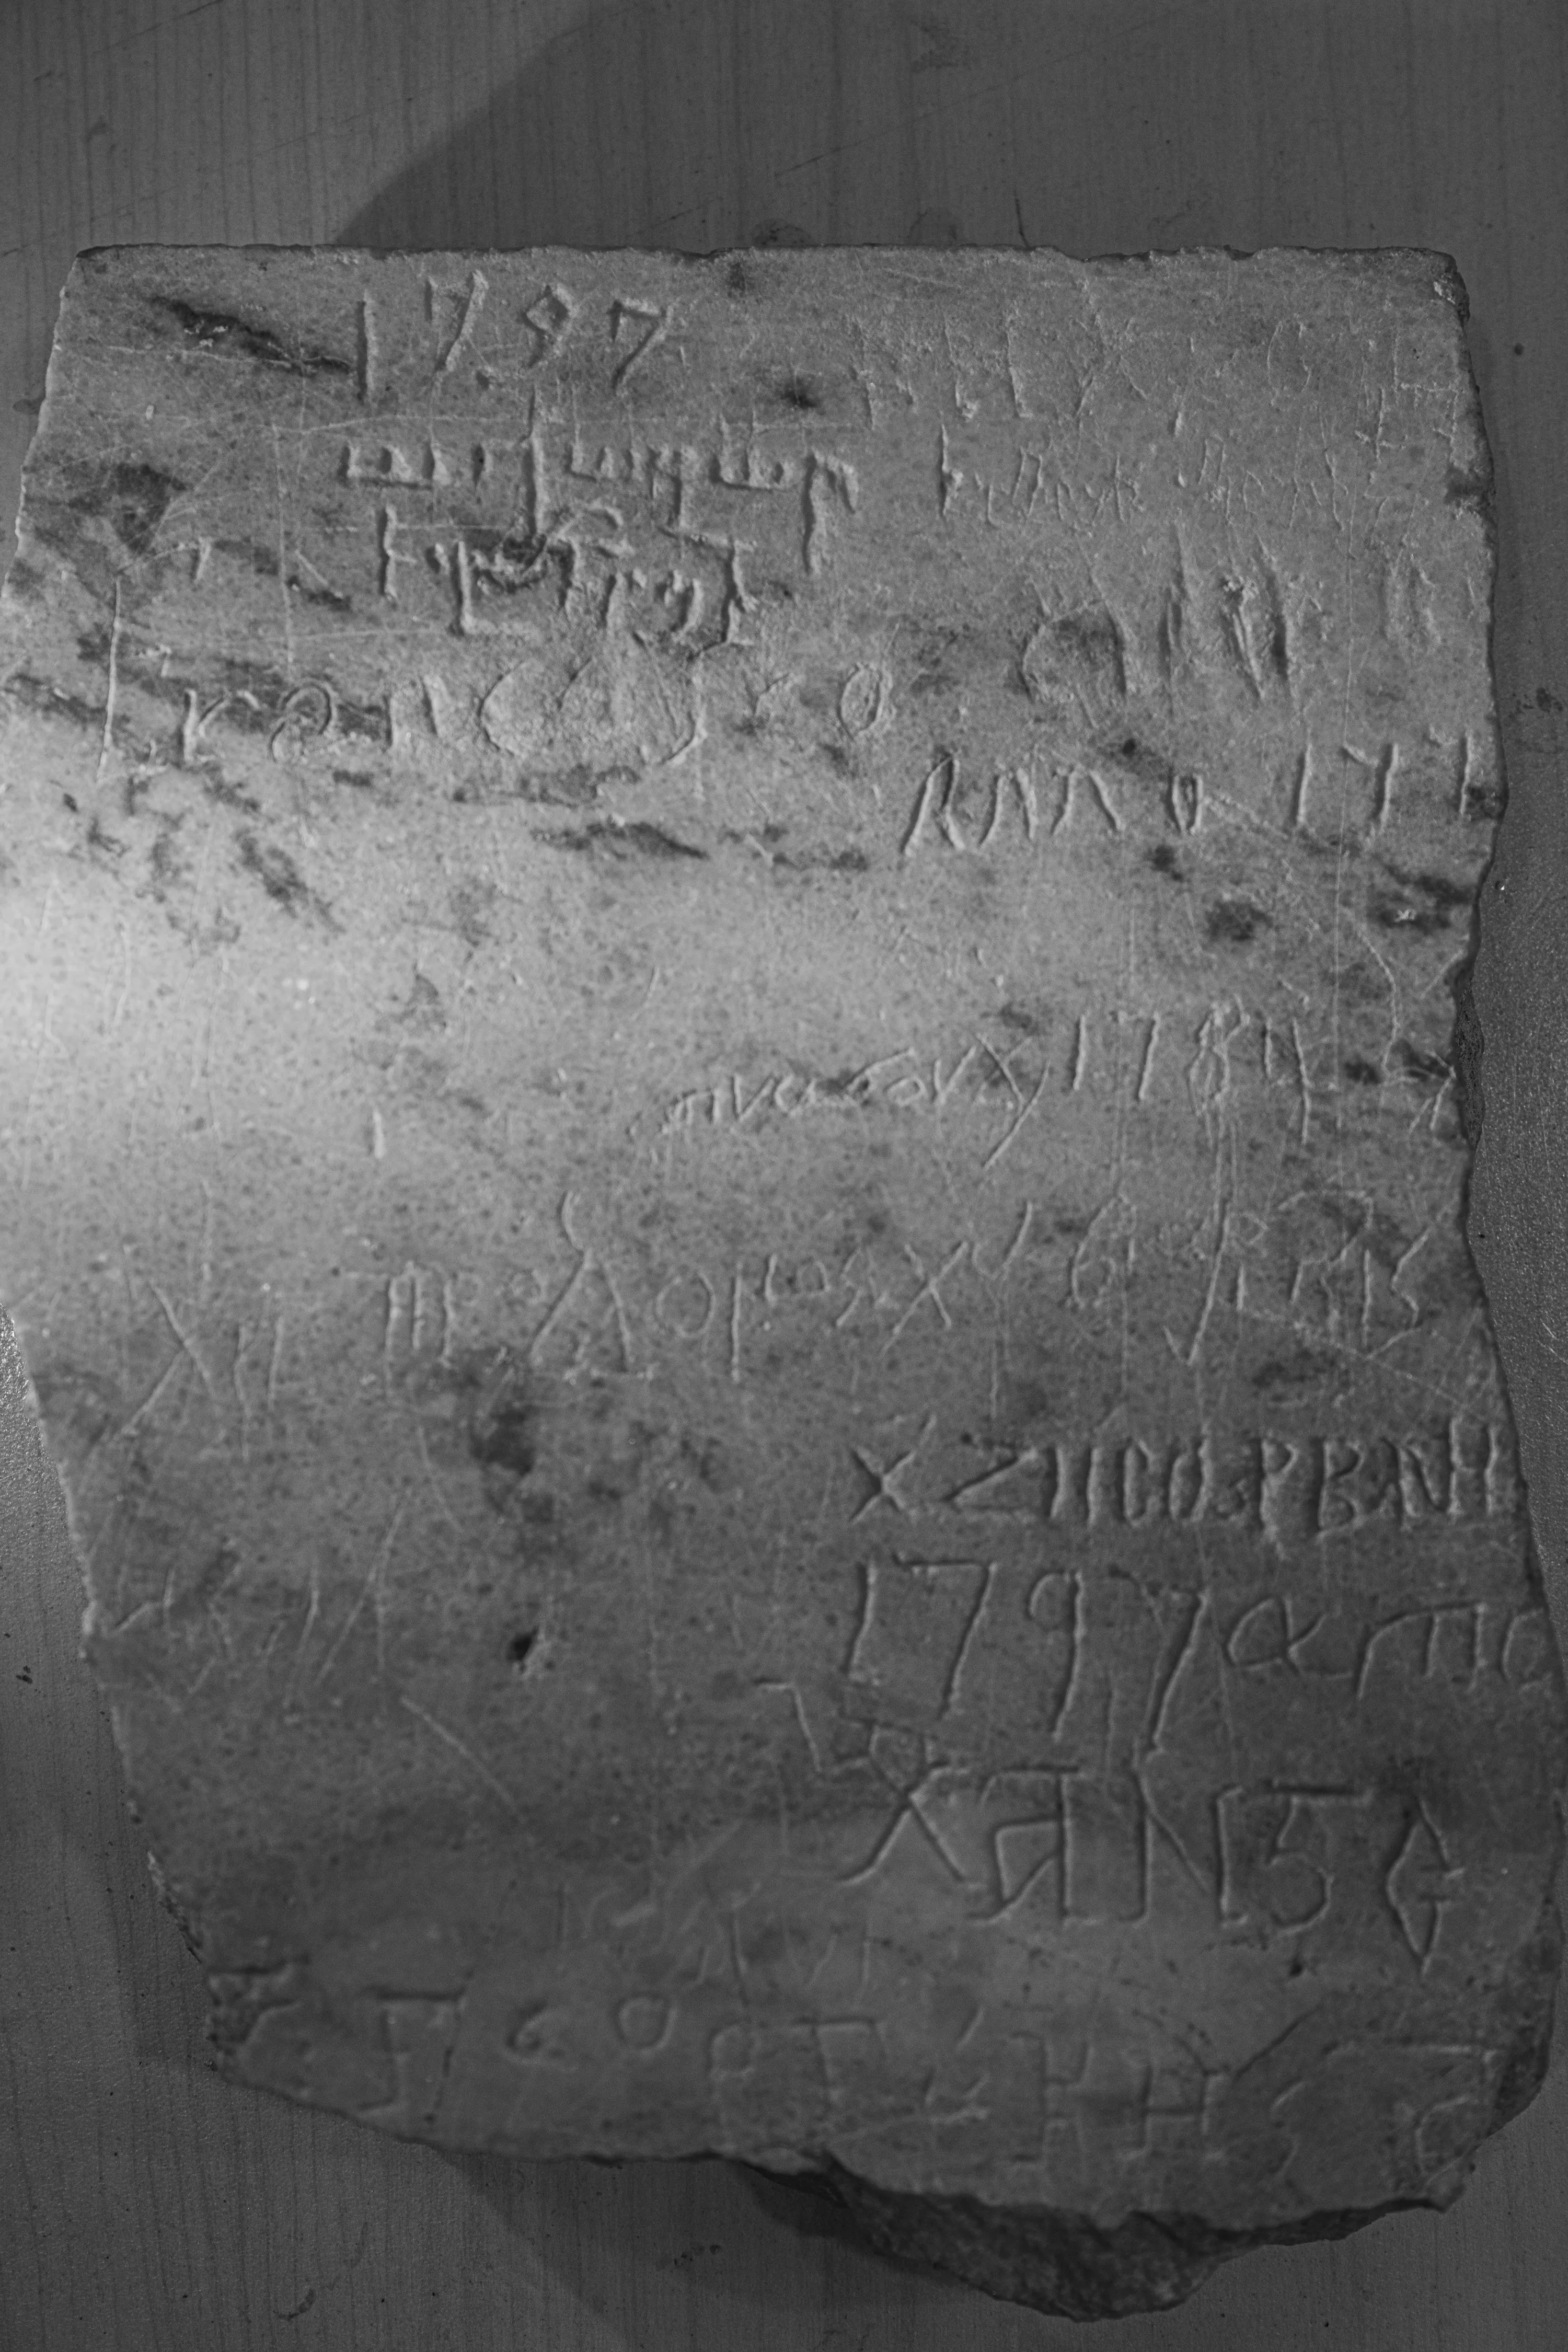 Inscriptions by pilgrims in Latin, Greek, and Armenian (18th century) uncovered during excavations at Basilica of Holy Sepulcher in Jerusalem. Credit: Gianfranco Pinto Ostuni